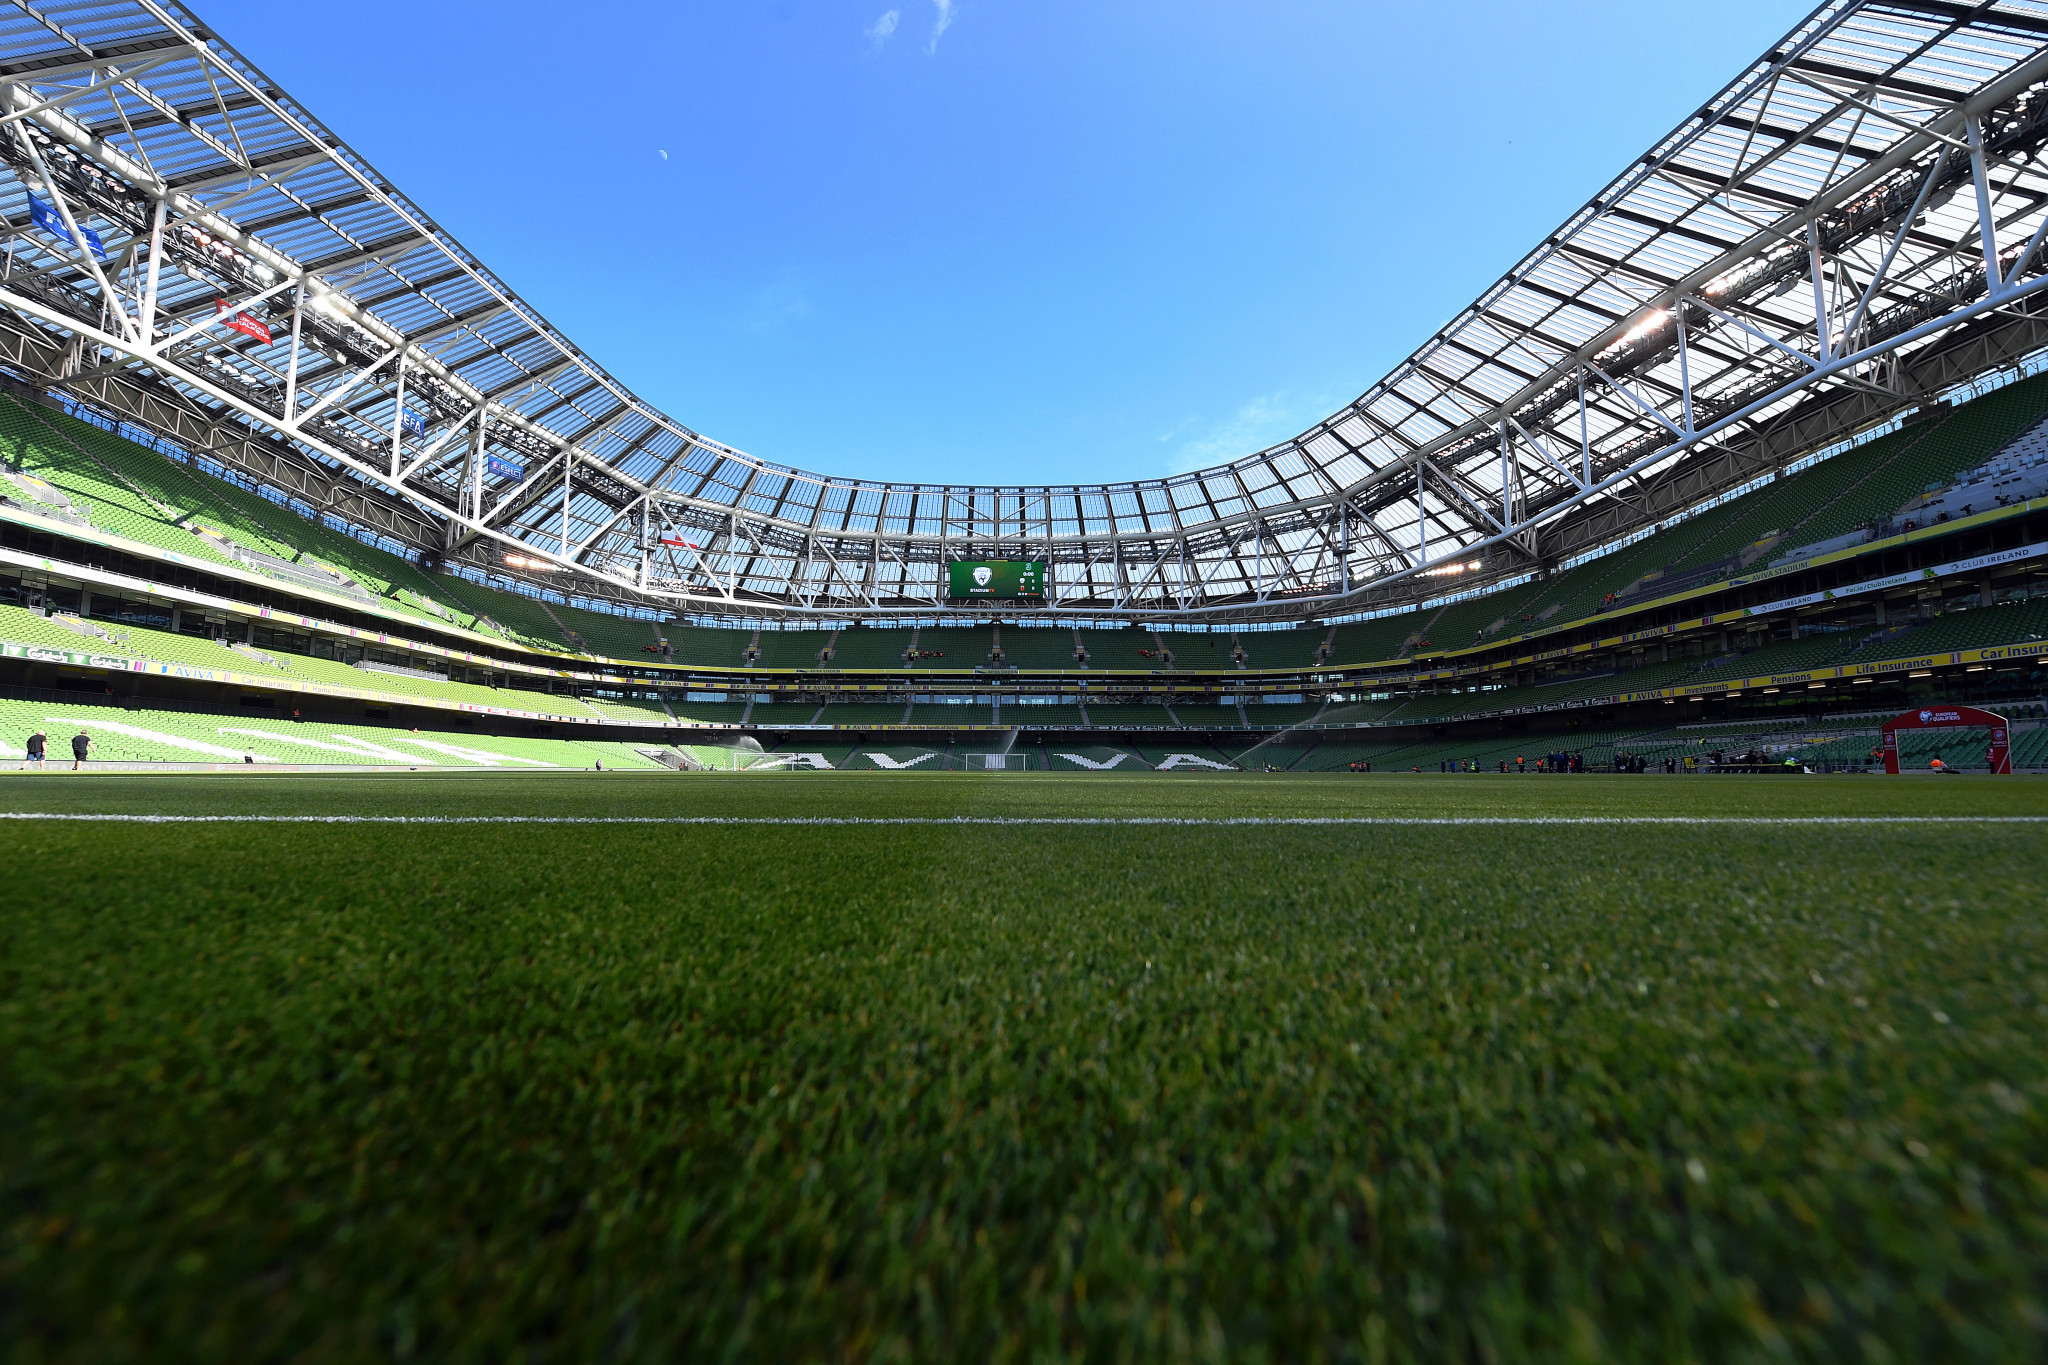 FAI chief executive Jonathan Hill said investment in Irish football facilities and hosting Euro 2028 "don’t need to be mutually exclusive" ©Getty Images